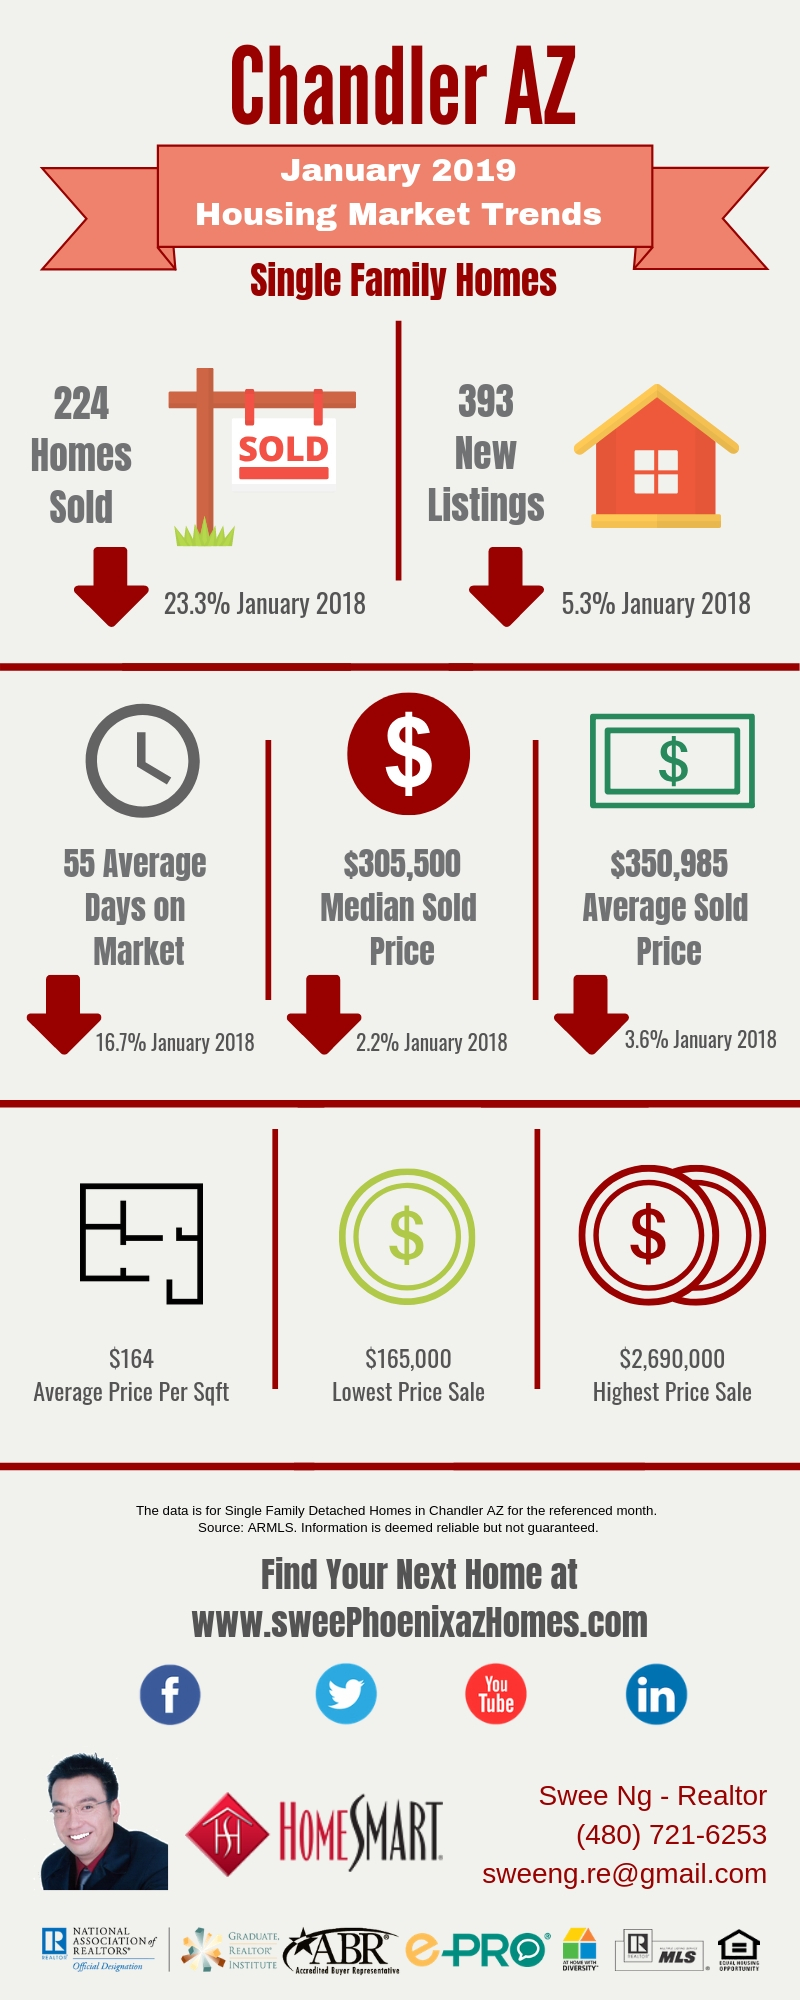 Chandler AZ Housing Market Update January 2019 by Swee Ng, House Value and Real Estate Listings